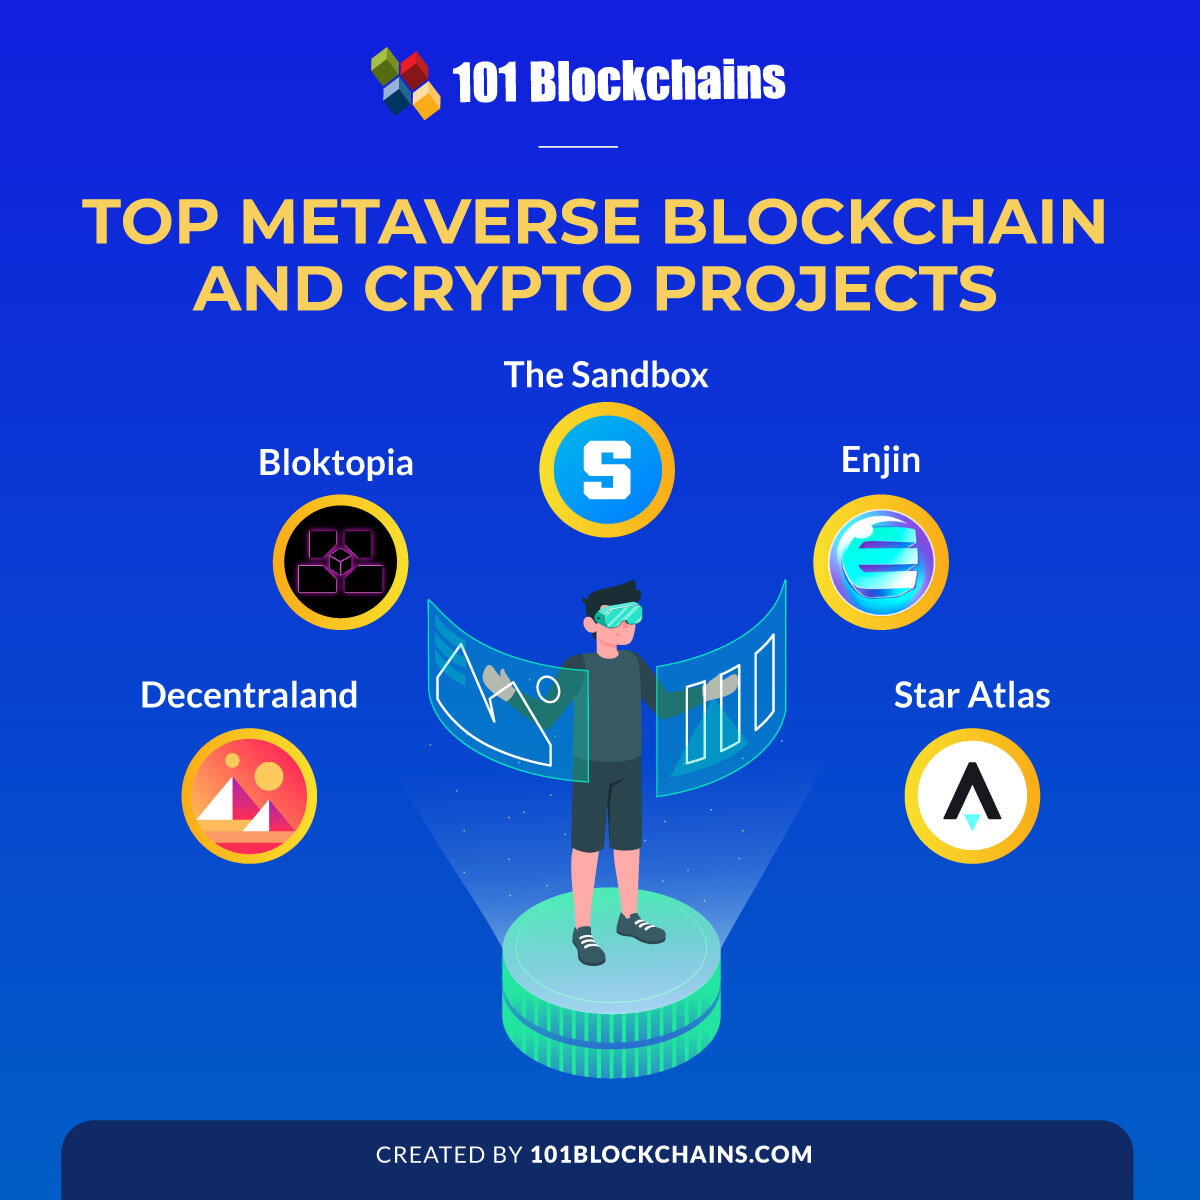 Top Metaverse Blockchain and Crypto Projects